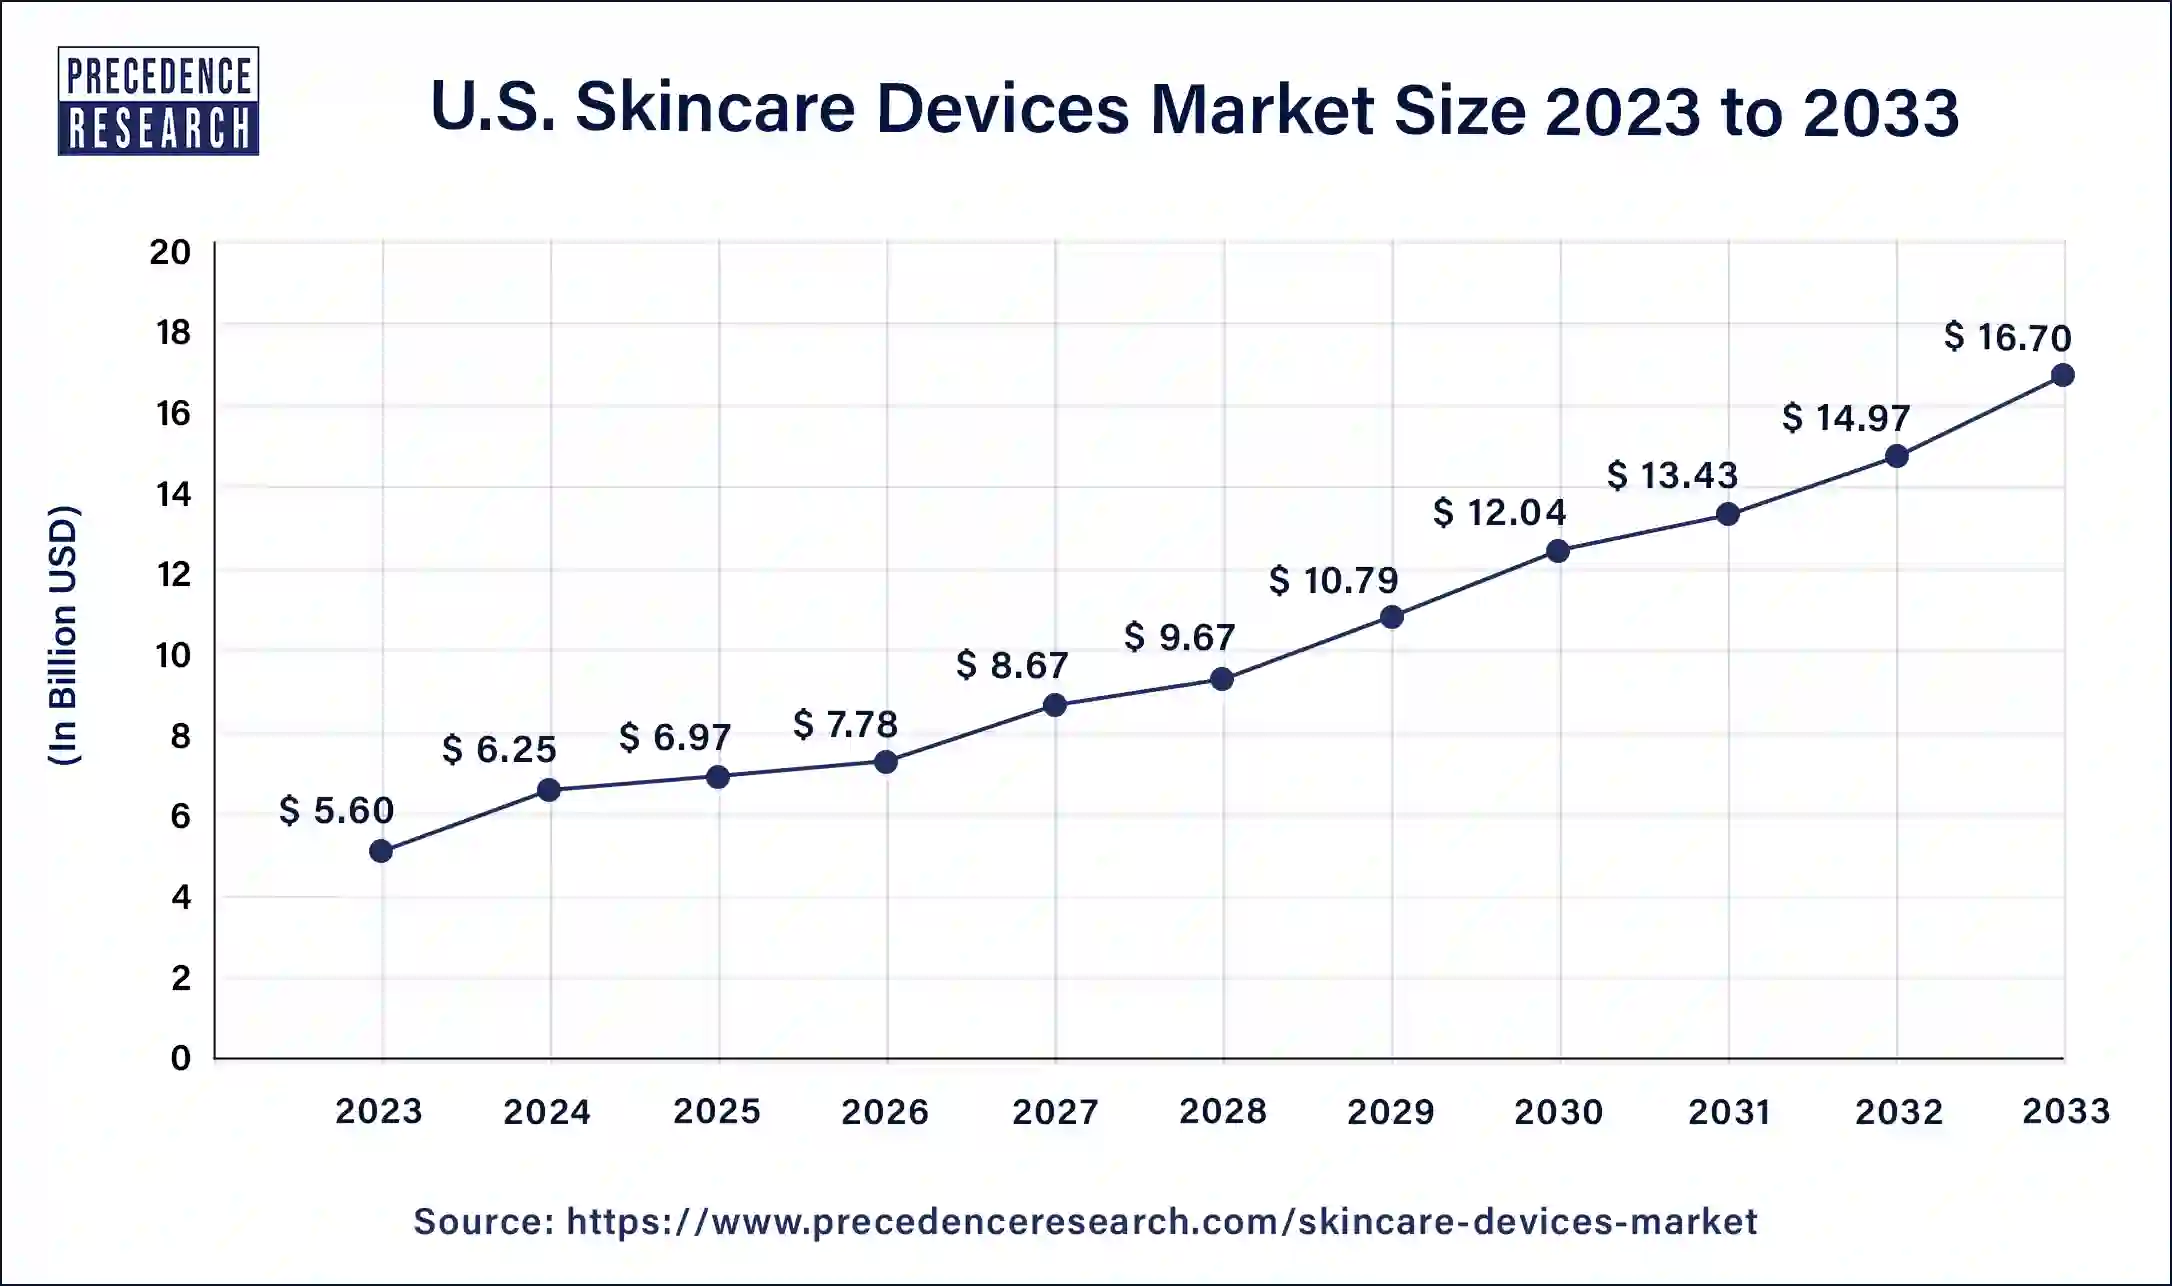 U.S. Skincare Devices Market Size 2024 to 2033